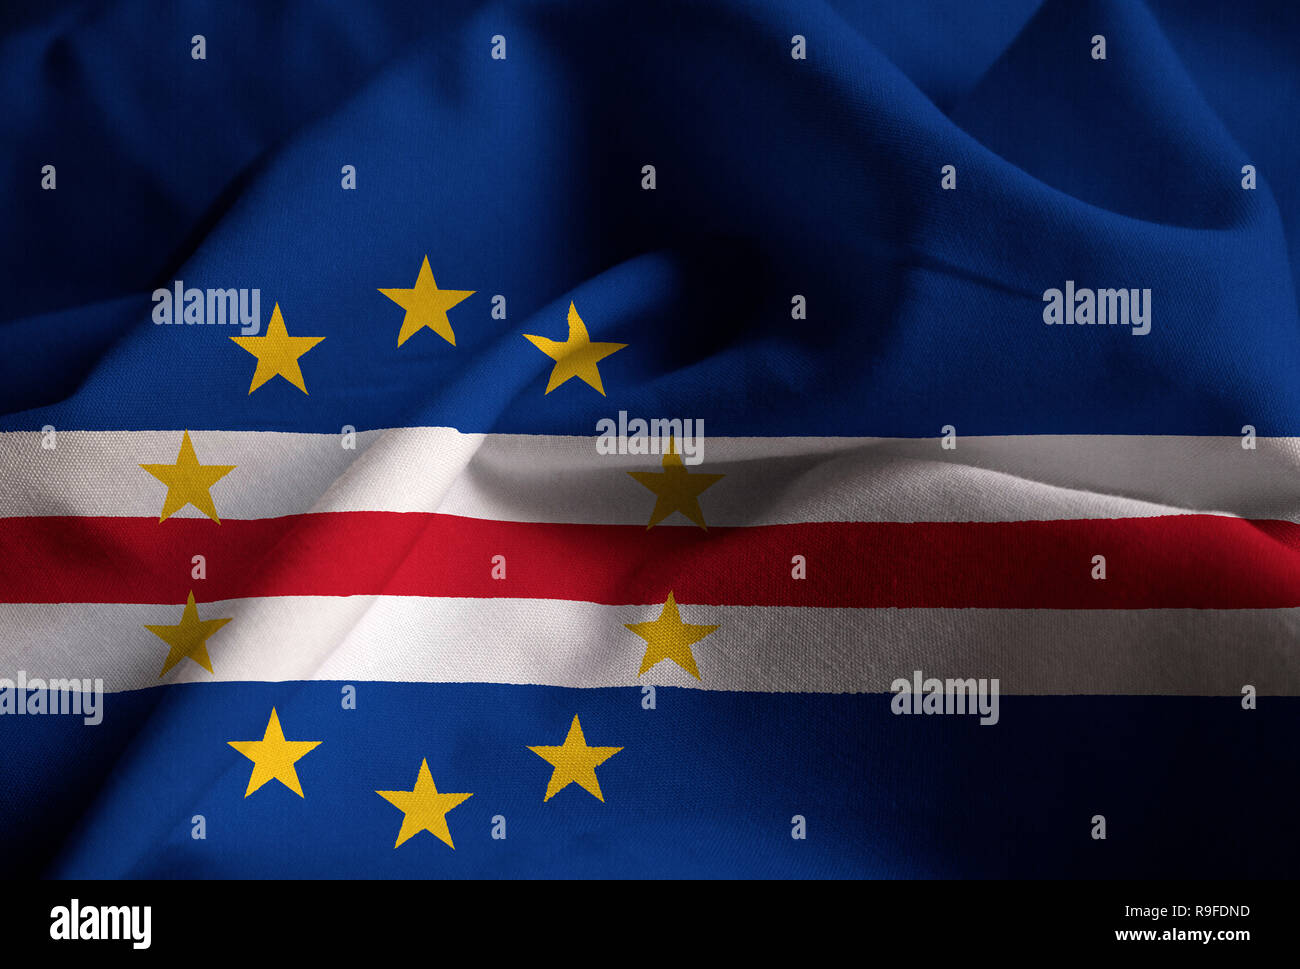 Closeup of Ruffled Cape Verde Flag, Cape Verde Flag Blowing in Wind Stock Photo